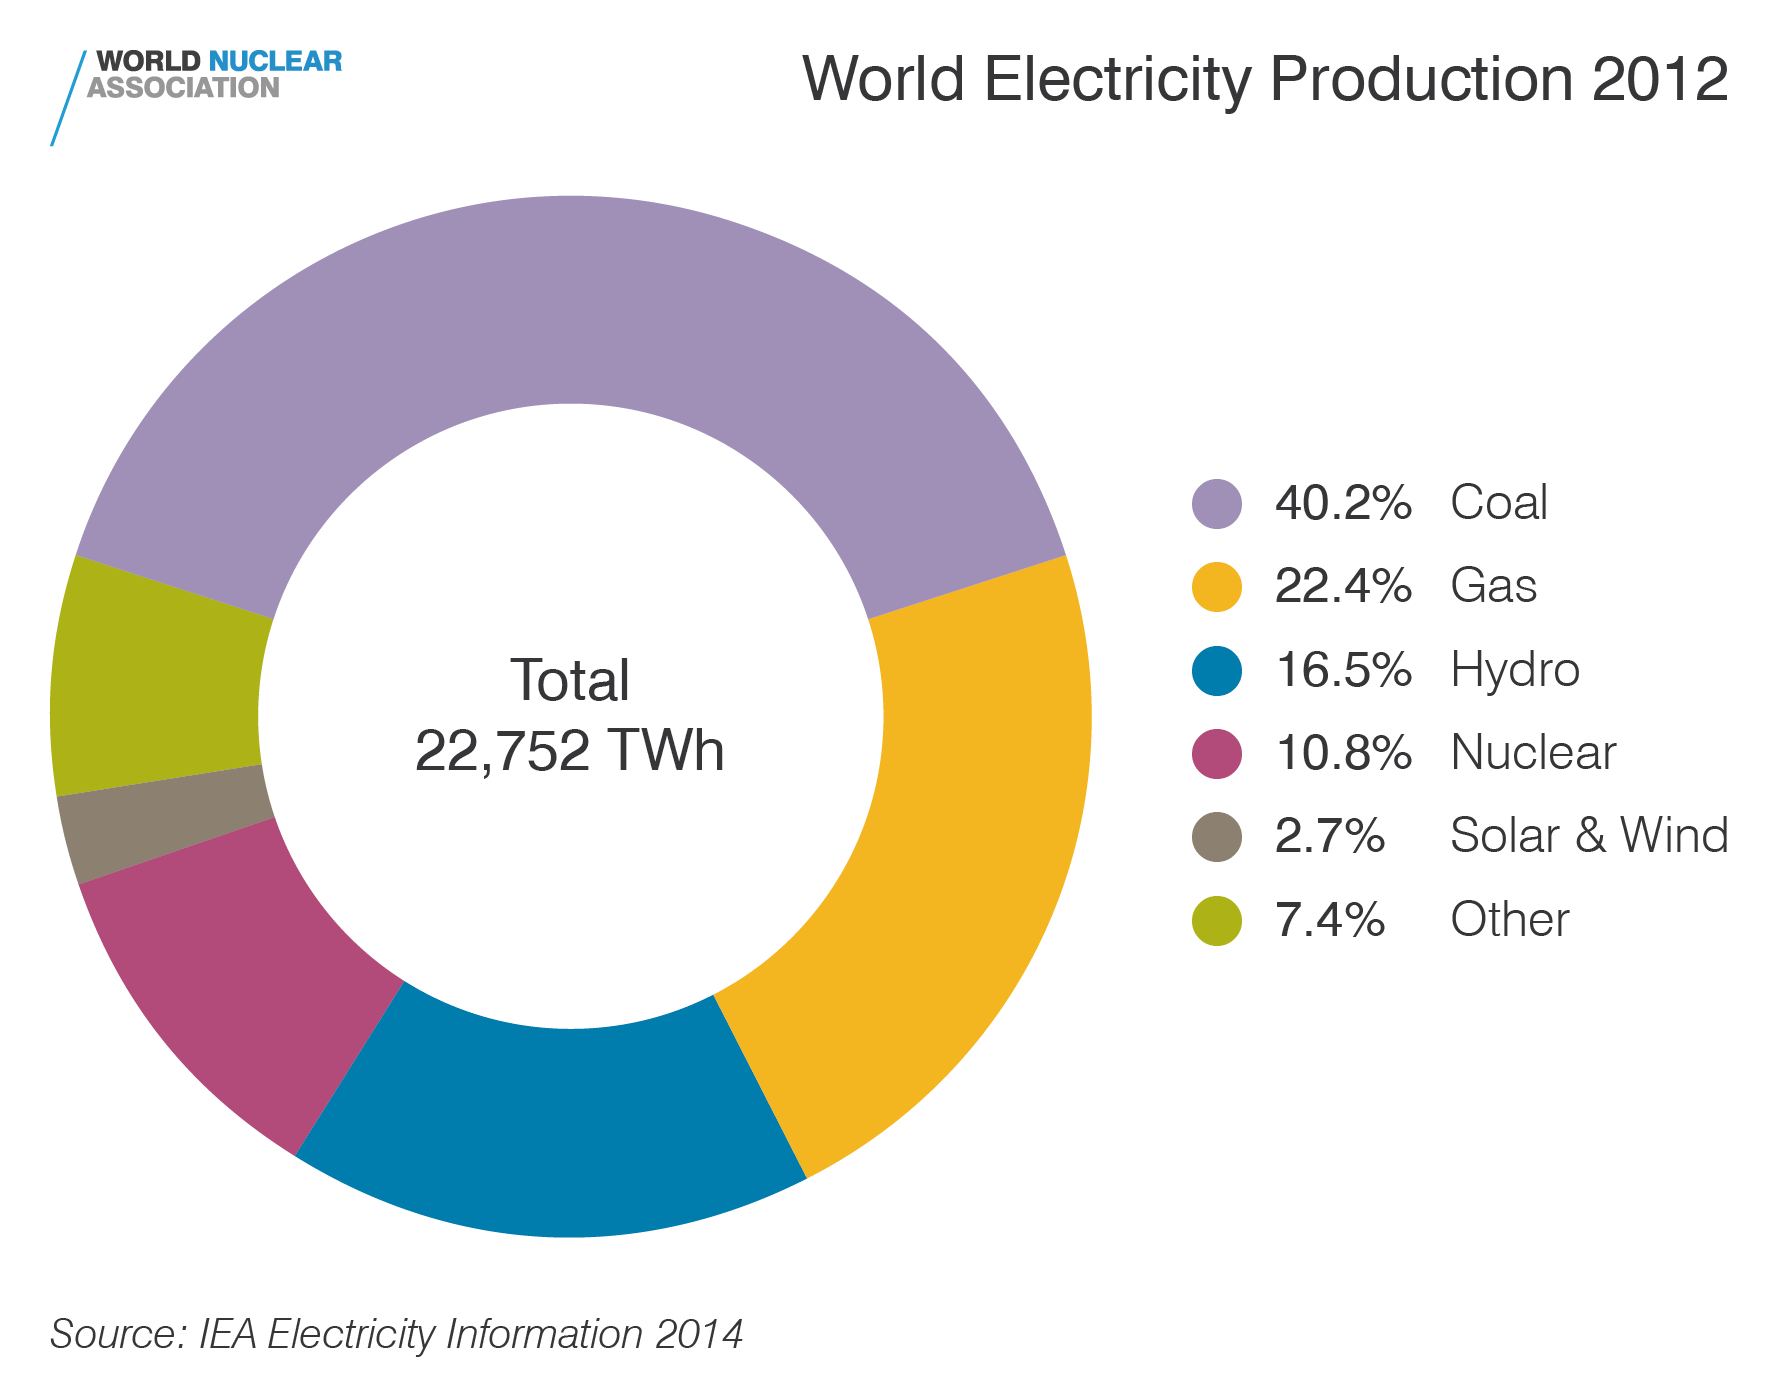 World electricity production